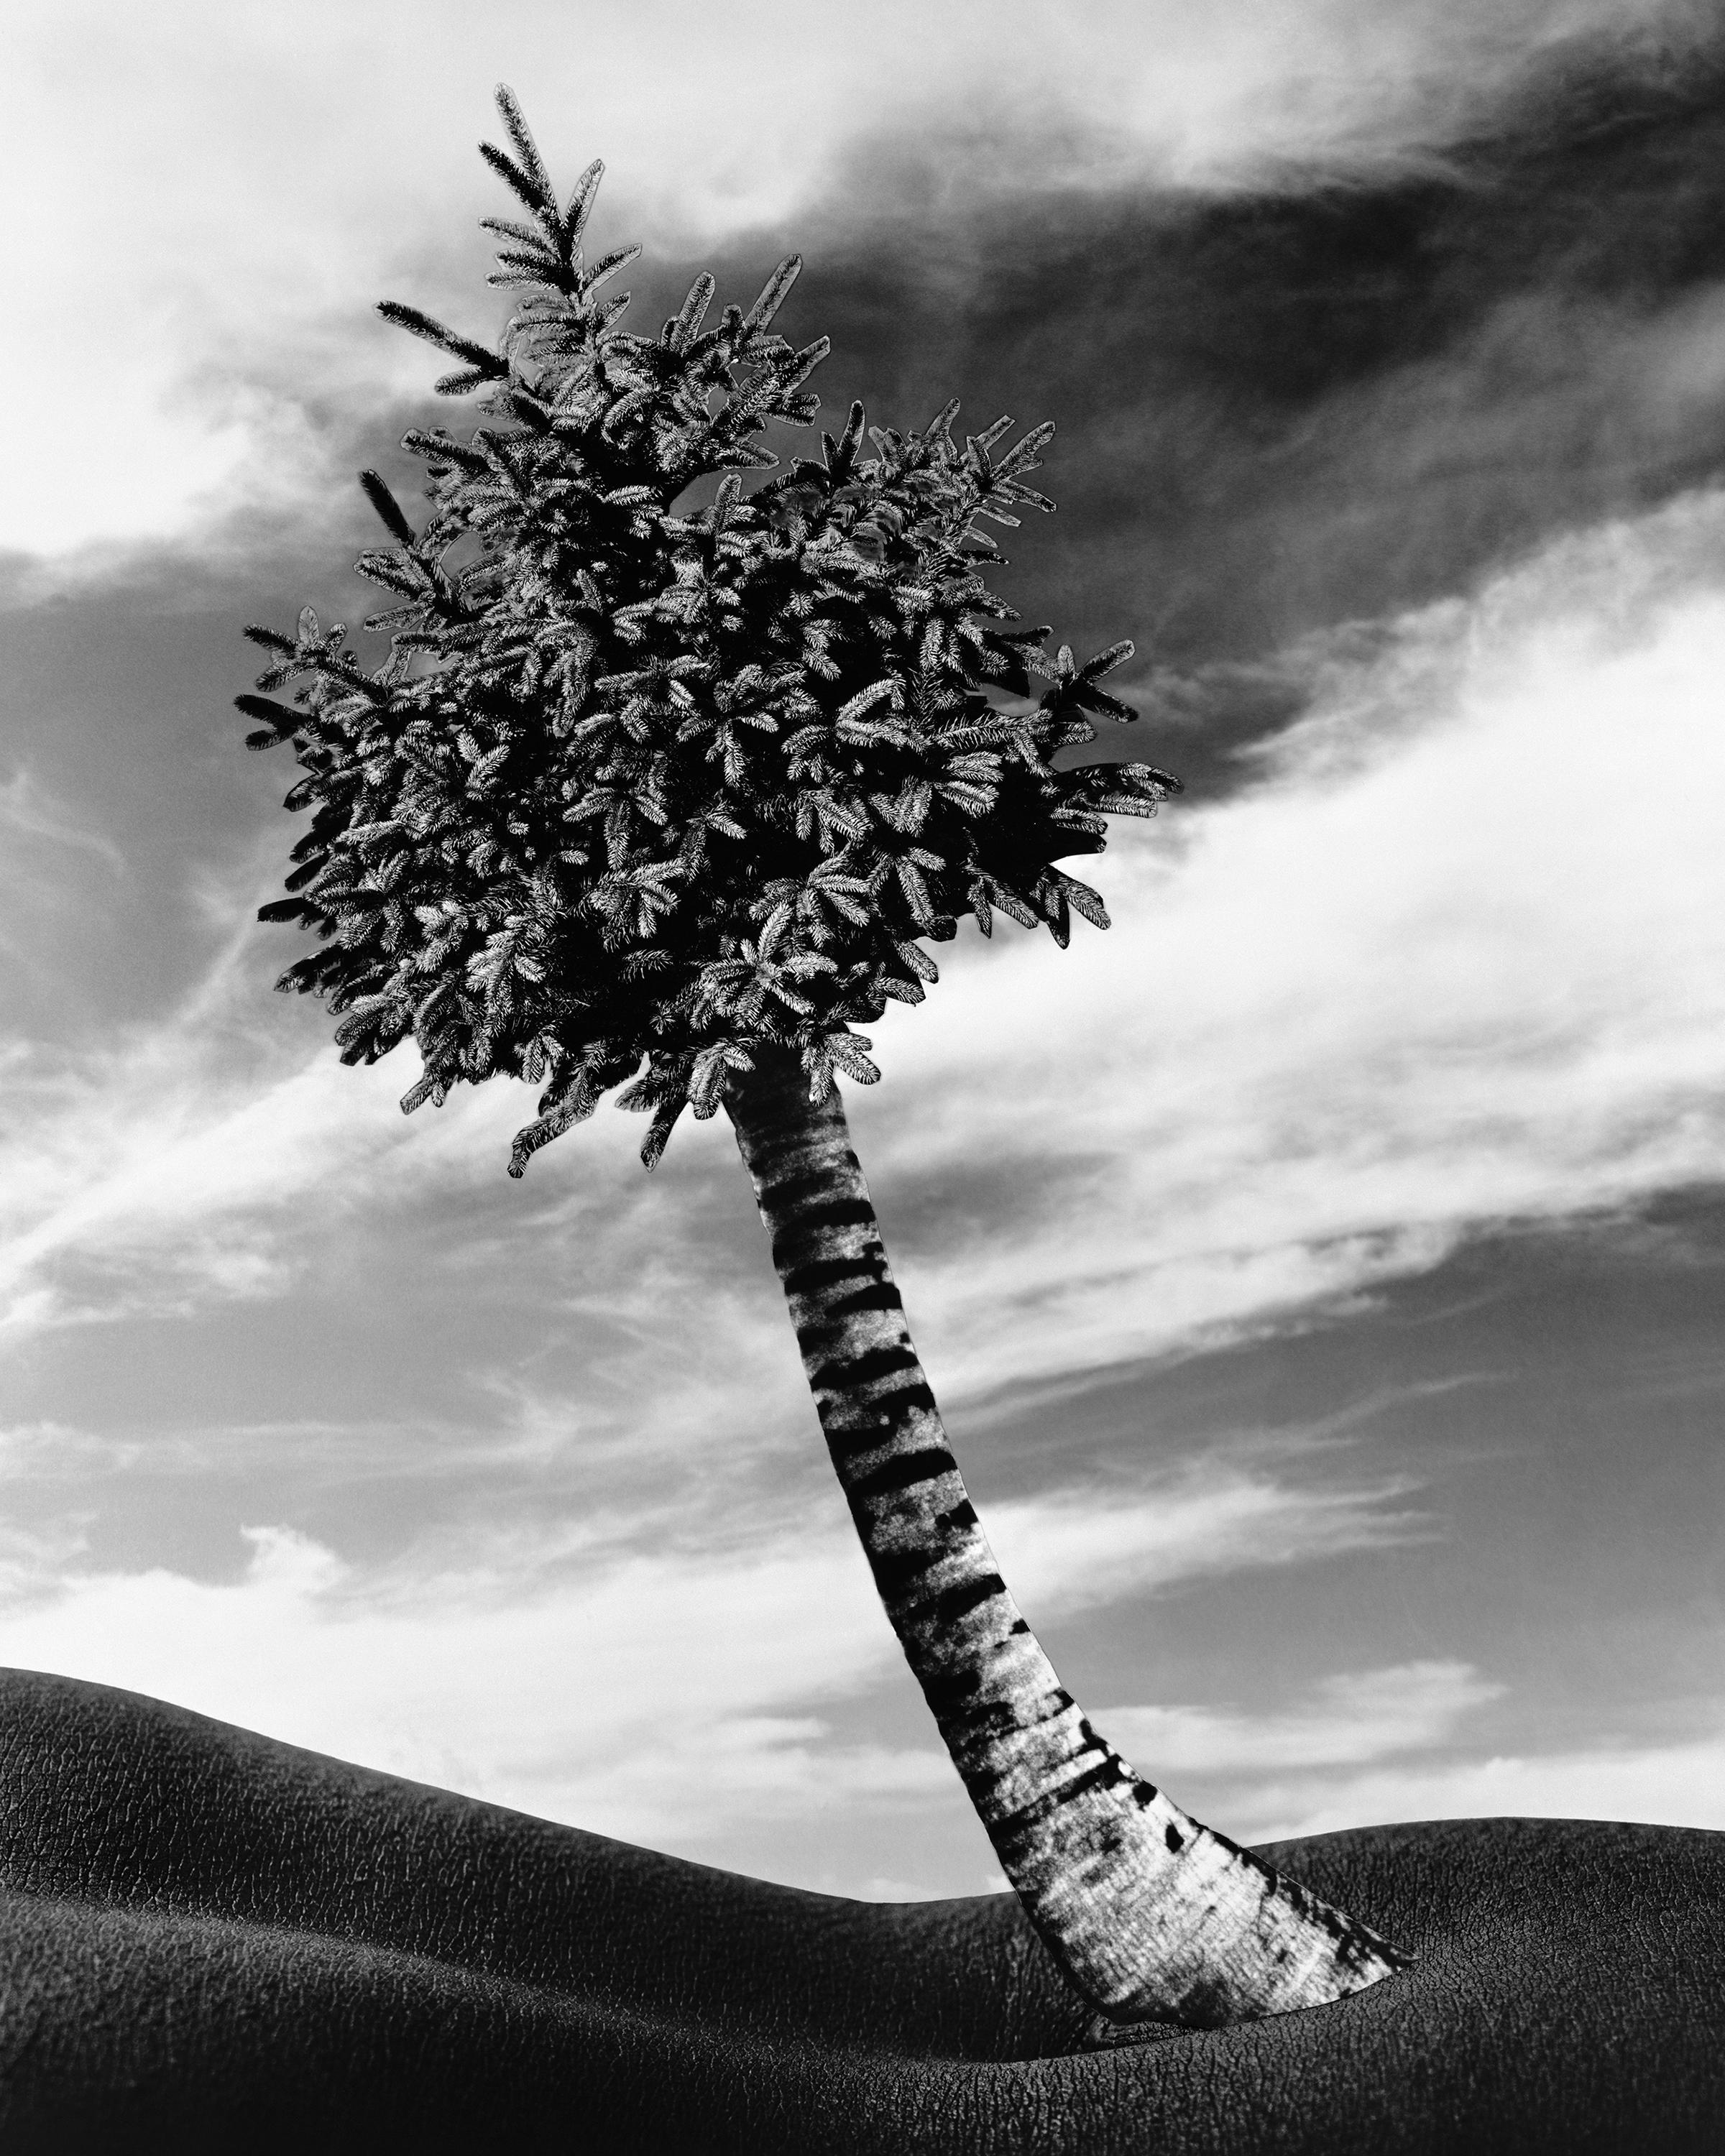 a monochrome composition of an evergreen fir tree with the trunk of a palm tree